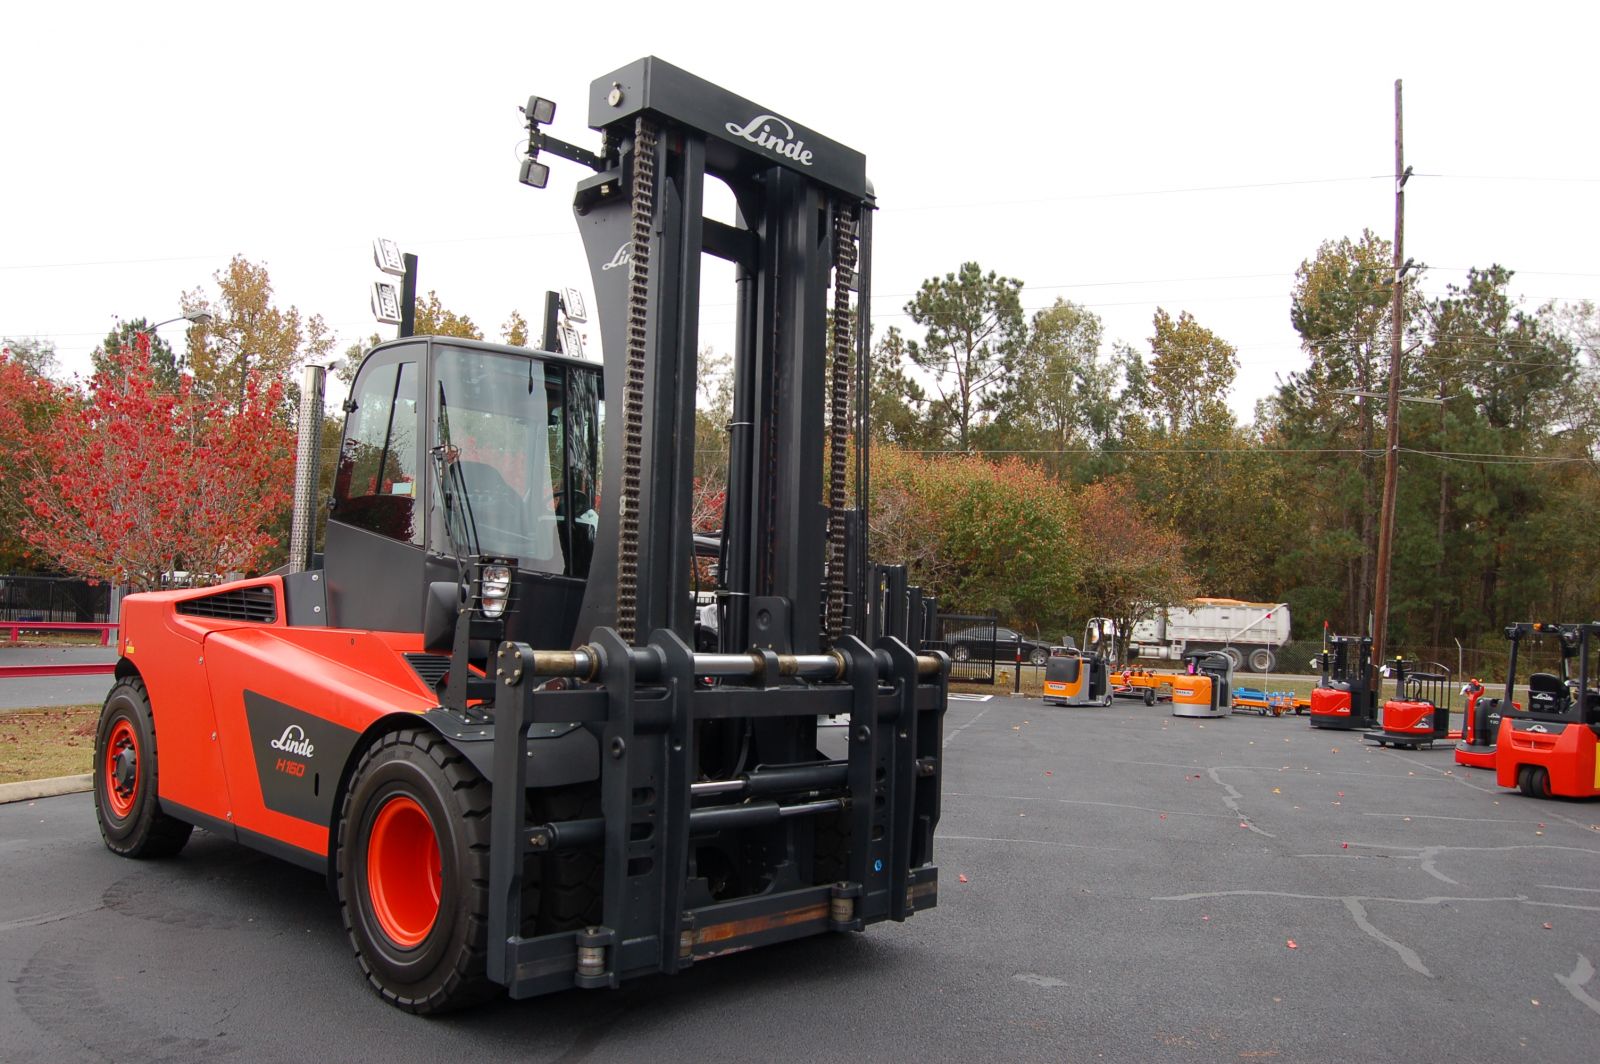 Kion North America, a manufacturer and supplier of materials handling forklifts and industrial trucks, is headquartered in Summerville. (Photo/Andy Owens)